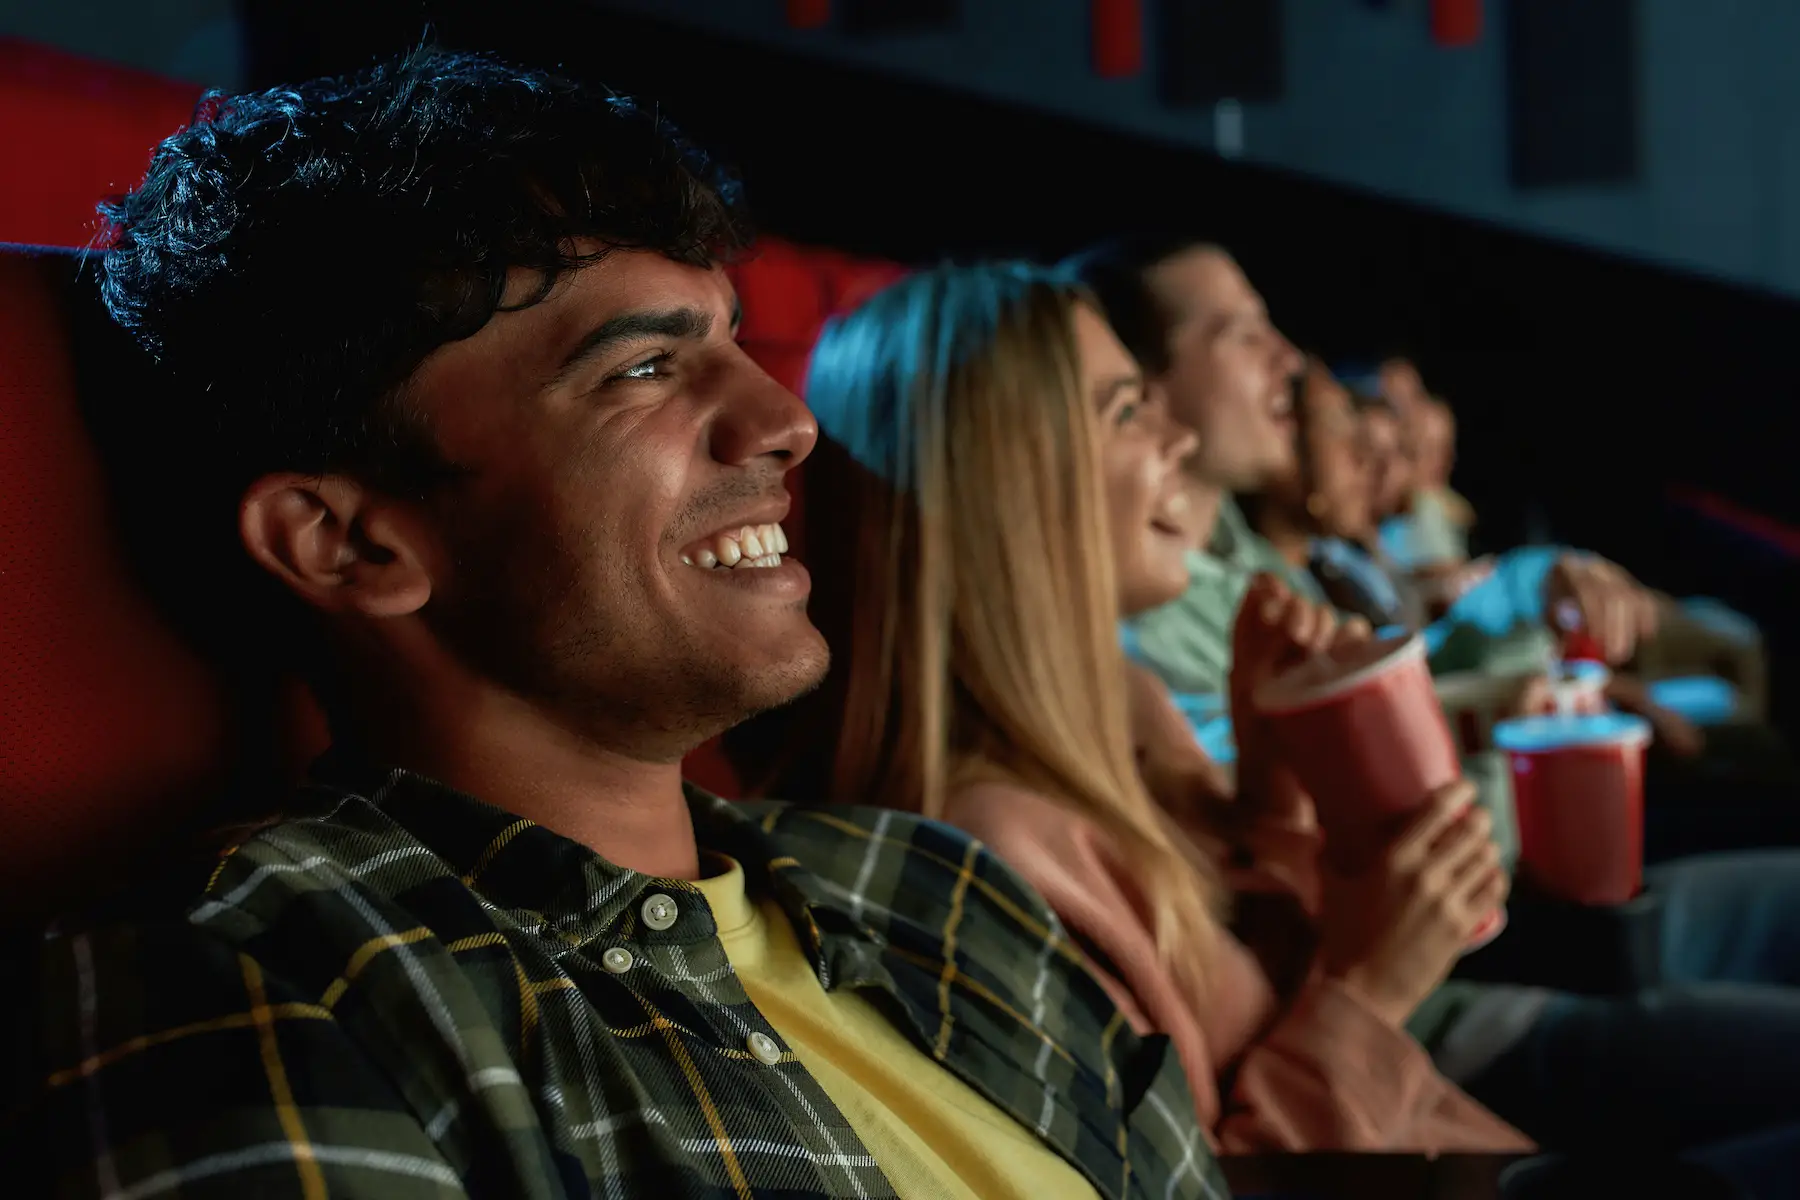 A group of friends laughing at a cinema